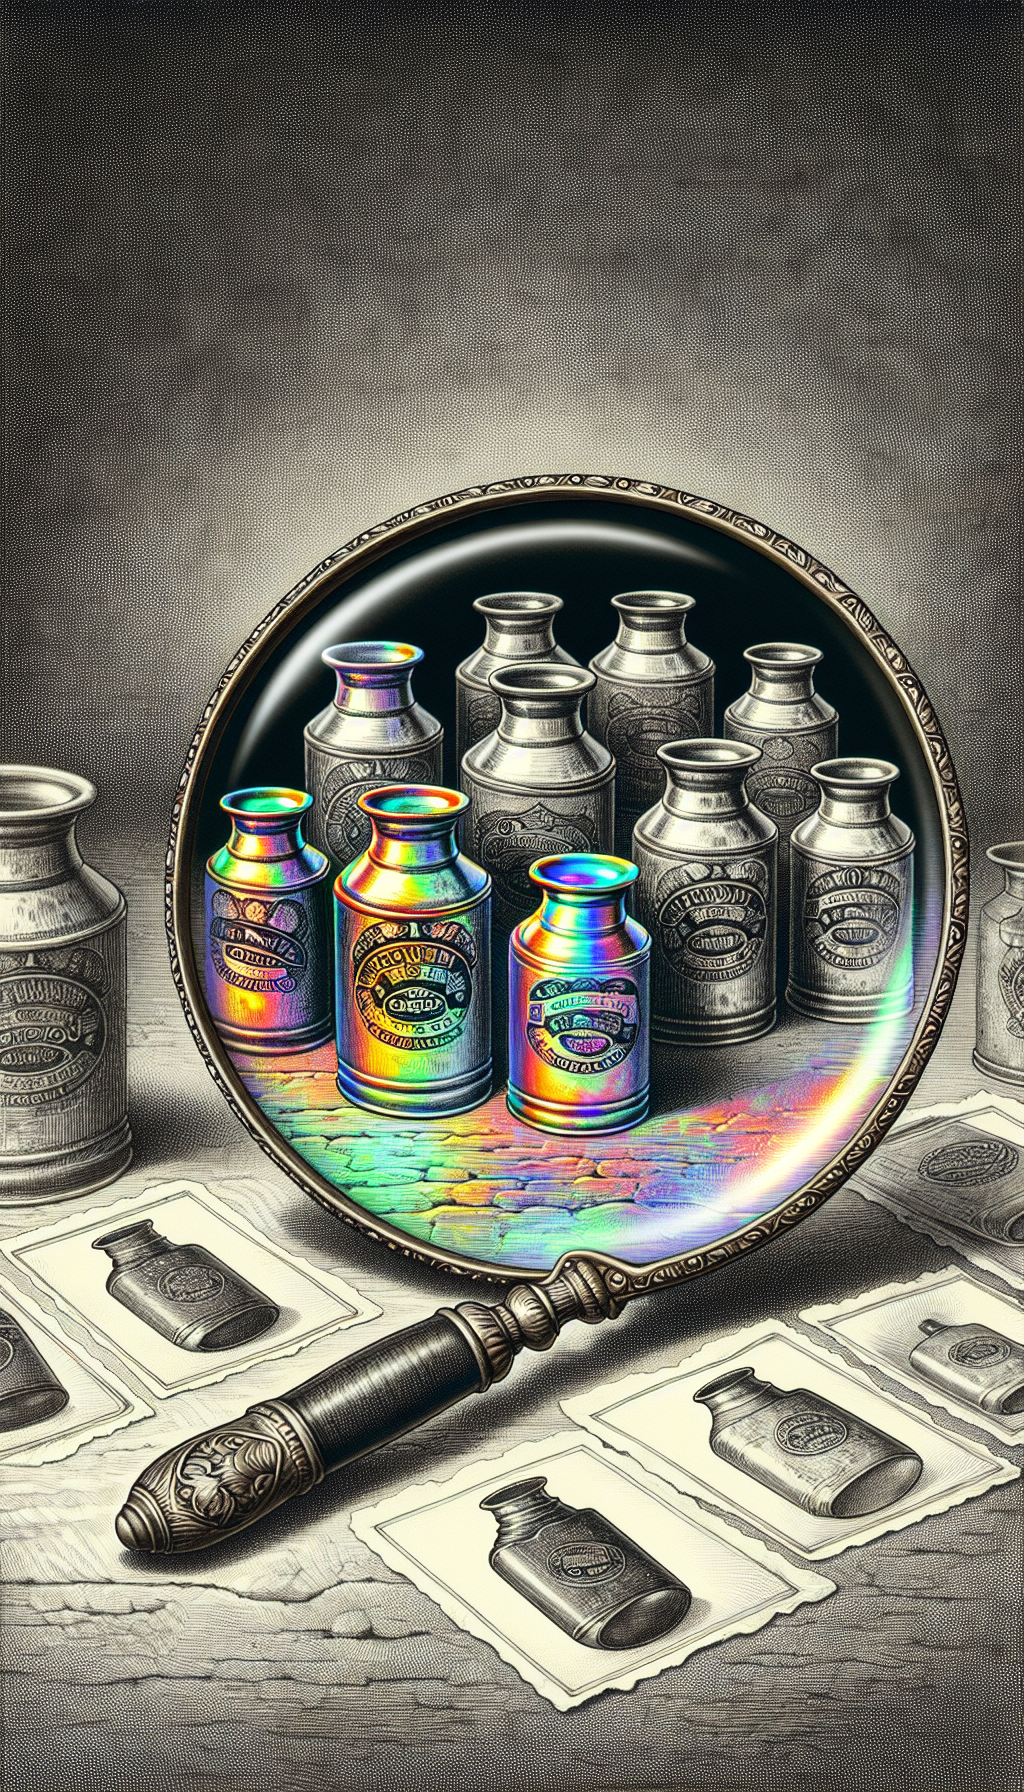 An antique magnifying glass looms over a neatly rowed assortment of vintage milk cans, with one can under intense scrutiny revealing tiny, shimmering holographic authenticity certificates when viewed through the lens. The background subtly transitions from sketched outlines to vibrant, colored realism, symbolizing the increasing value of verified authentic milk cans.